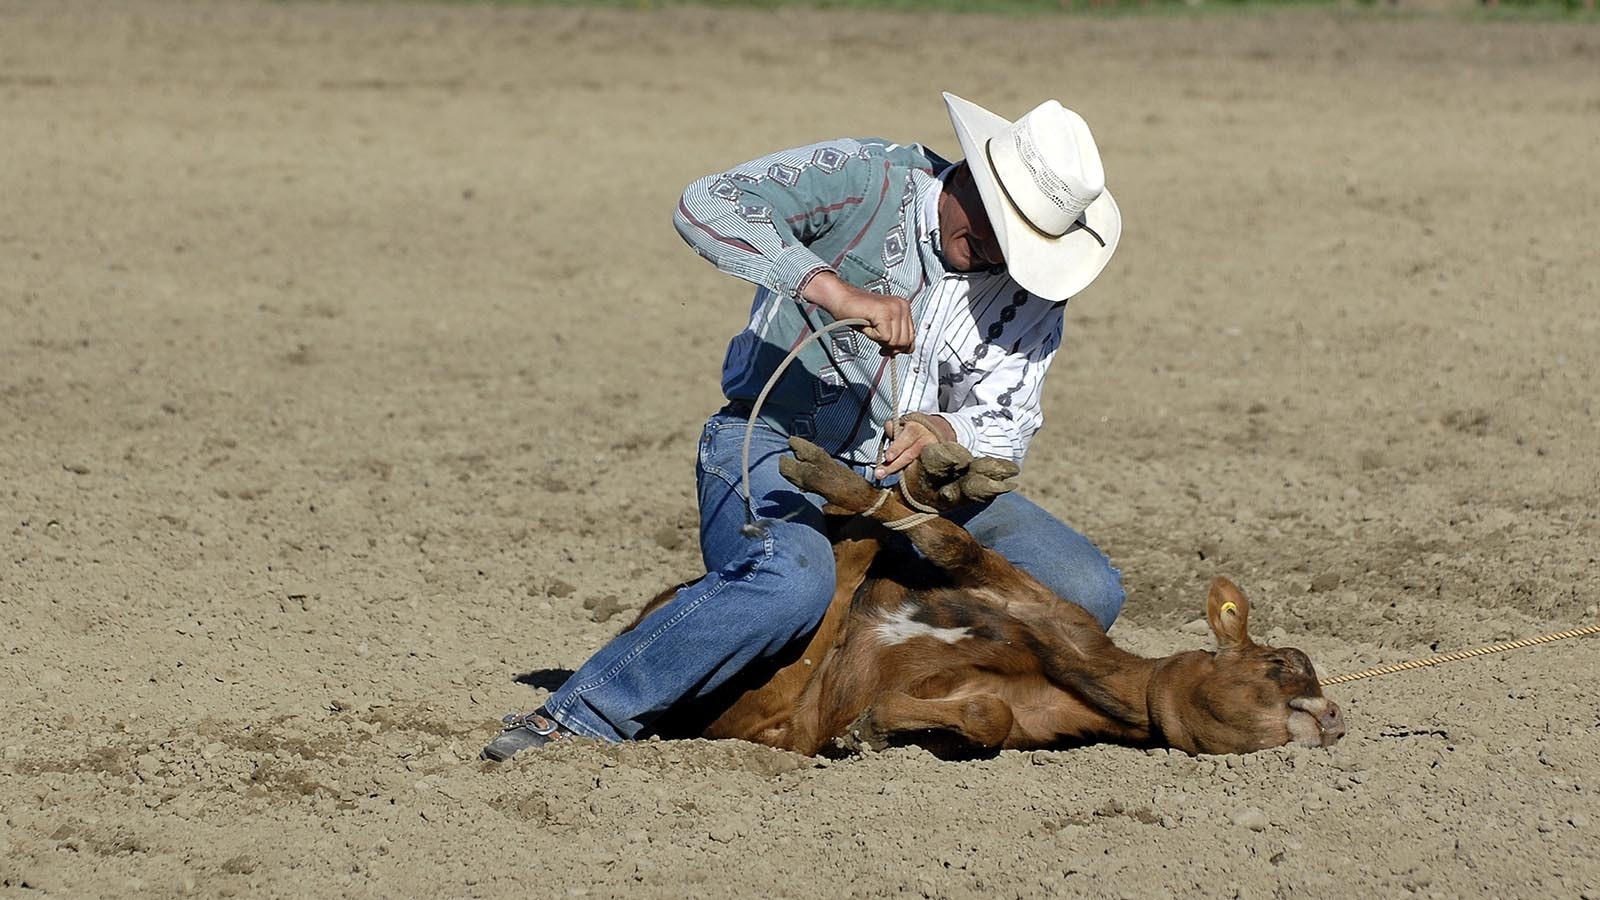 An example of tie-down roping.